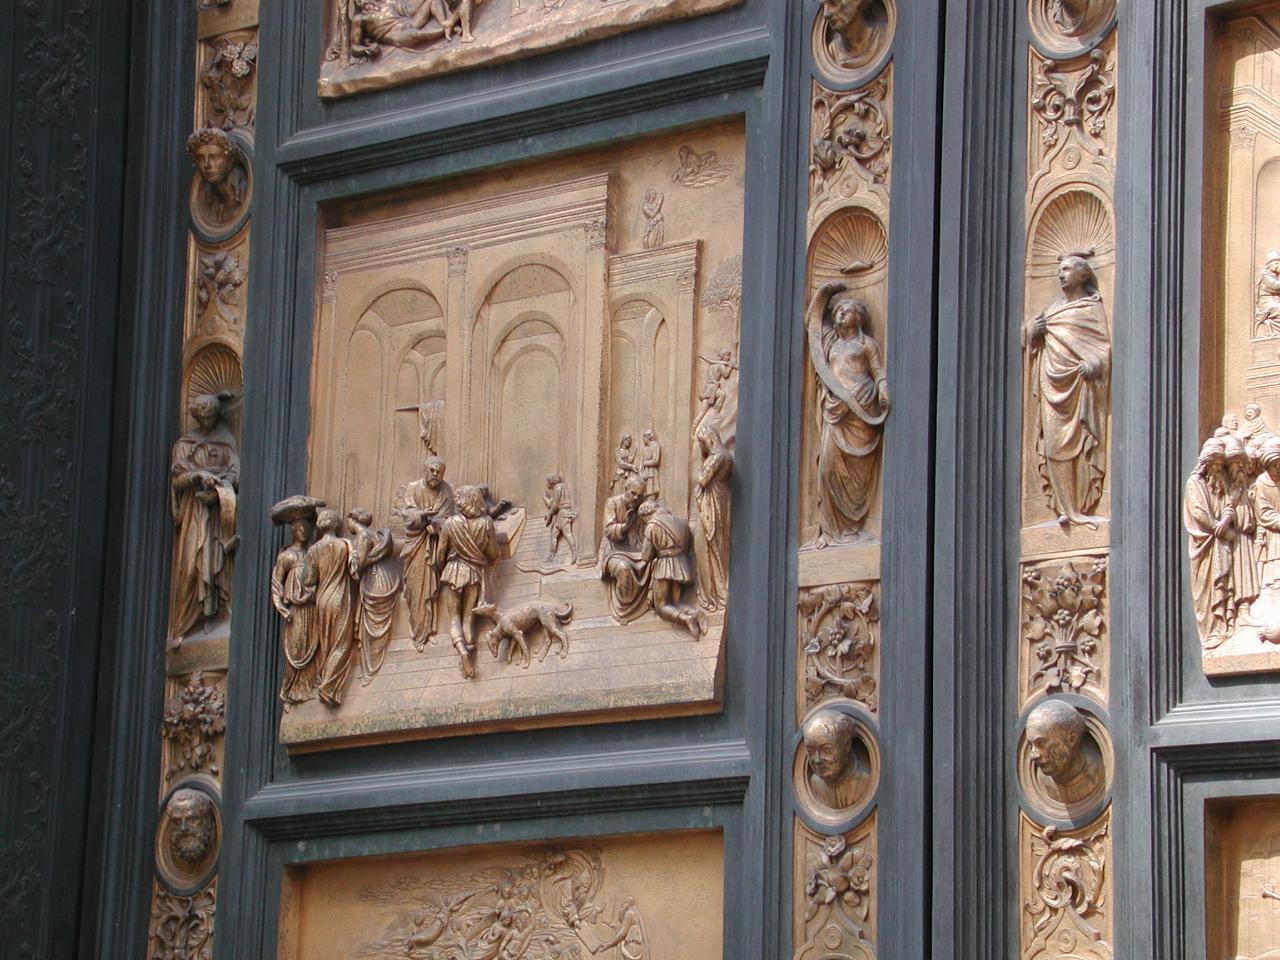 Baptistry doors, with 3 dimensional scenes and two heads are sculptor and his son